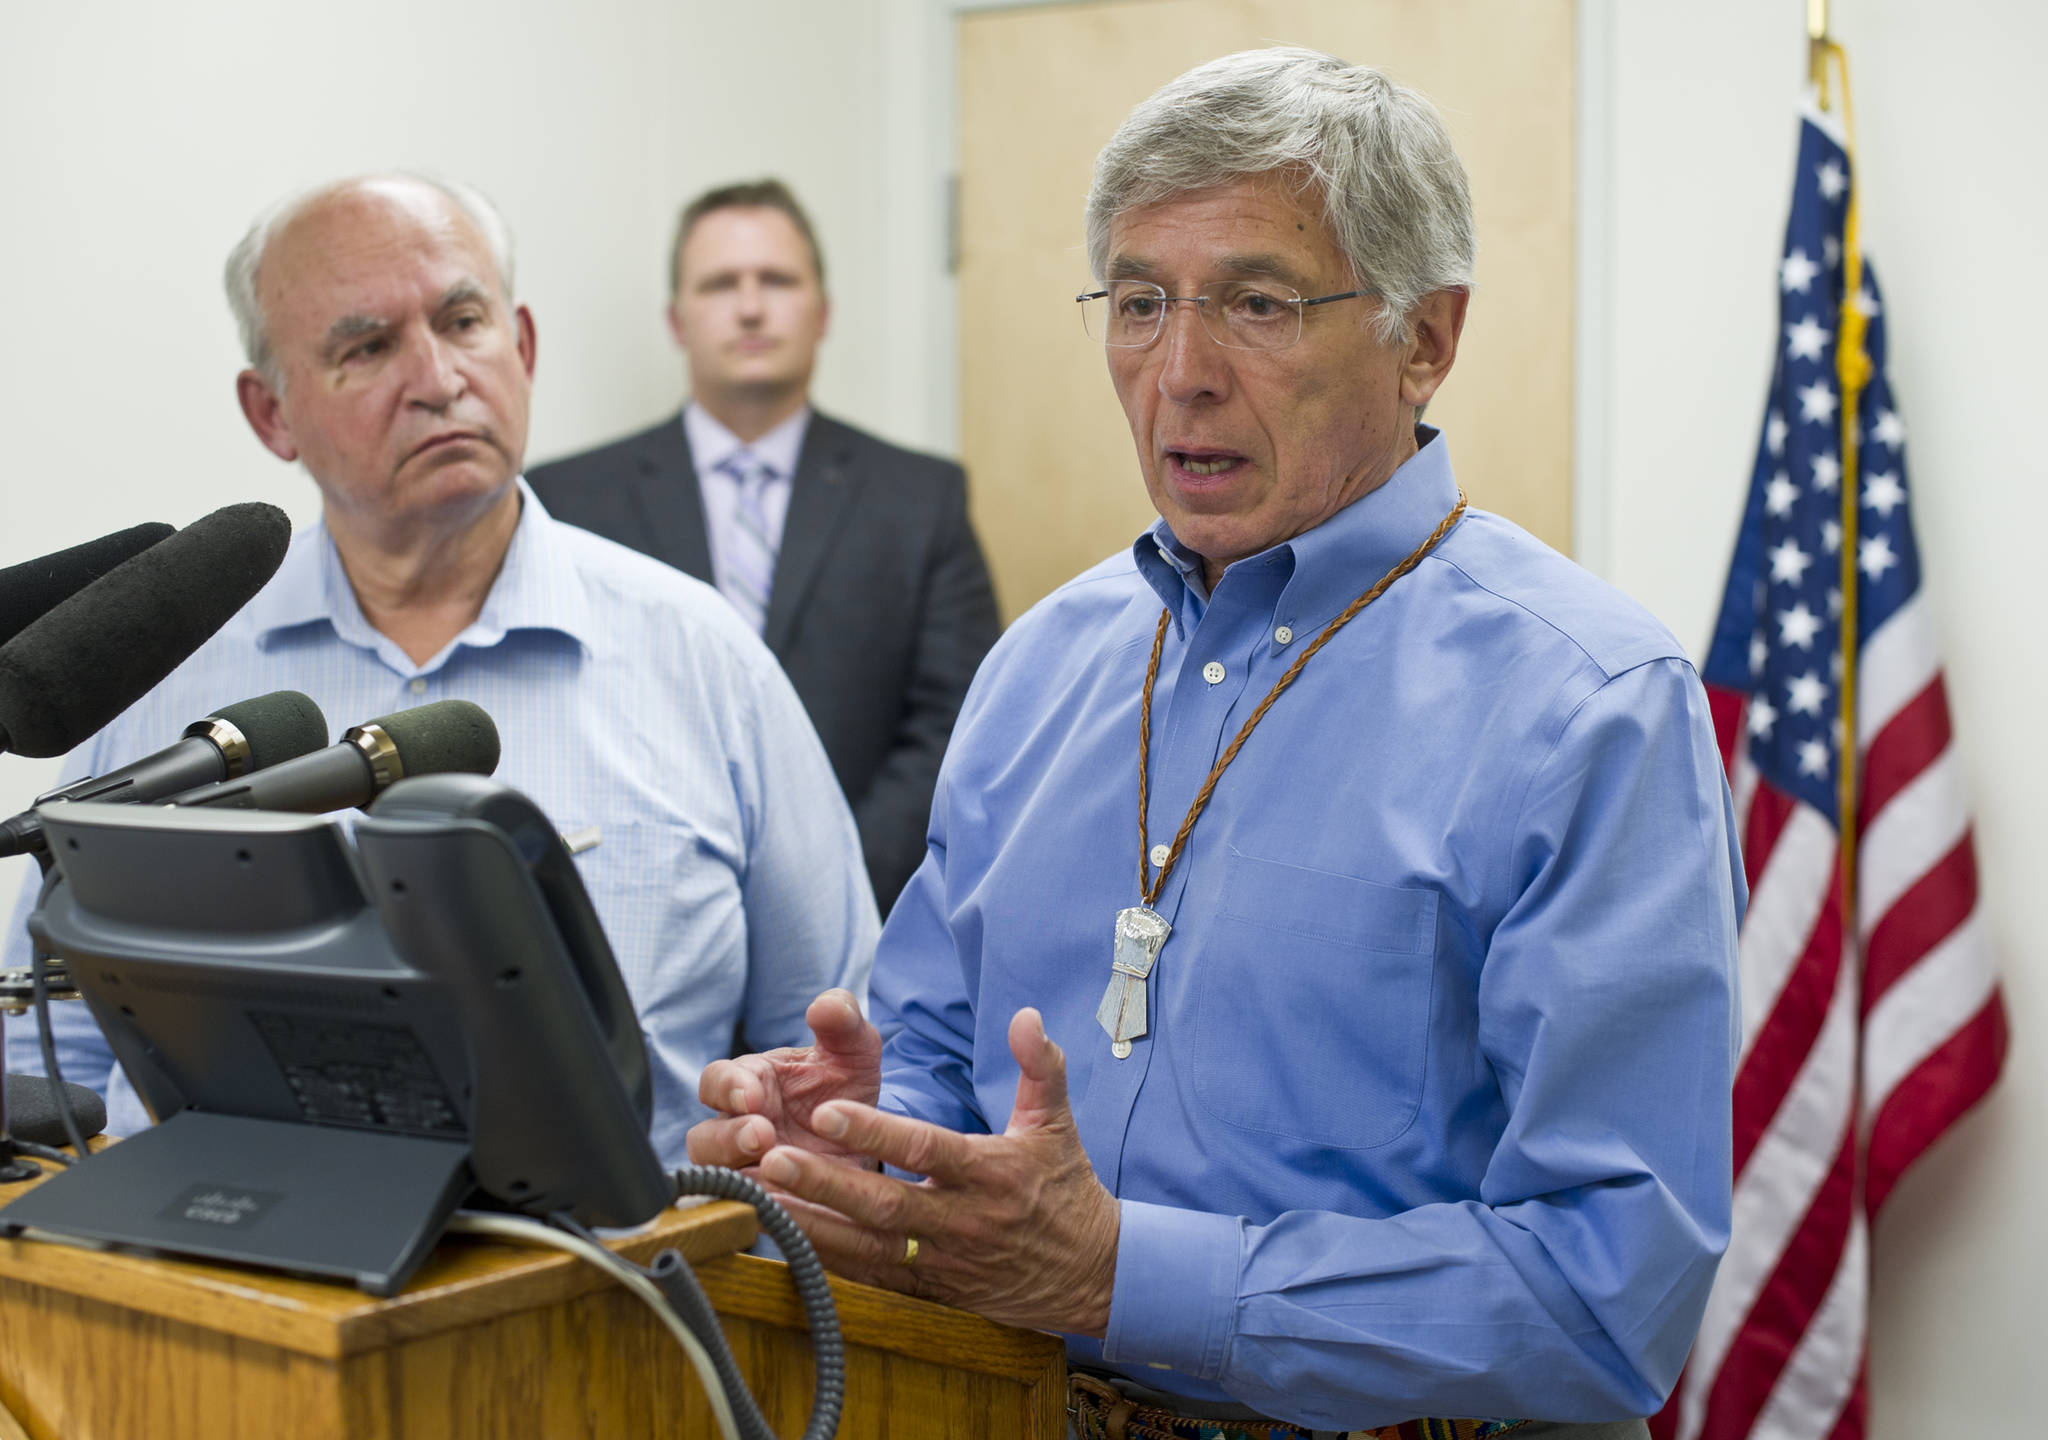 Lt. Gov. Byron Mallott, right, and British Columbia Minister of Energy and Mines Bill Bennett hold a press conference about their meetings on tranboundary mining concerns.